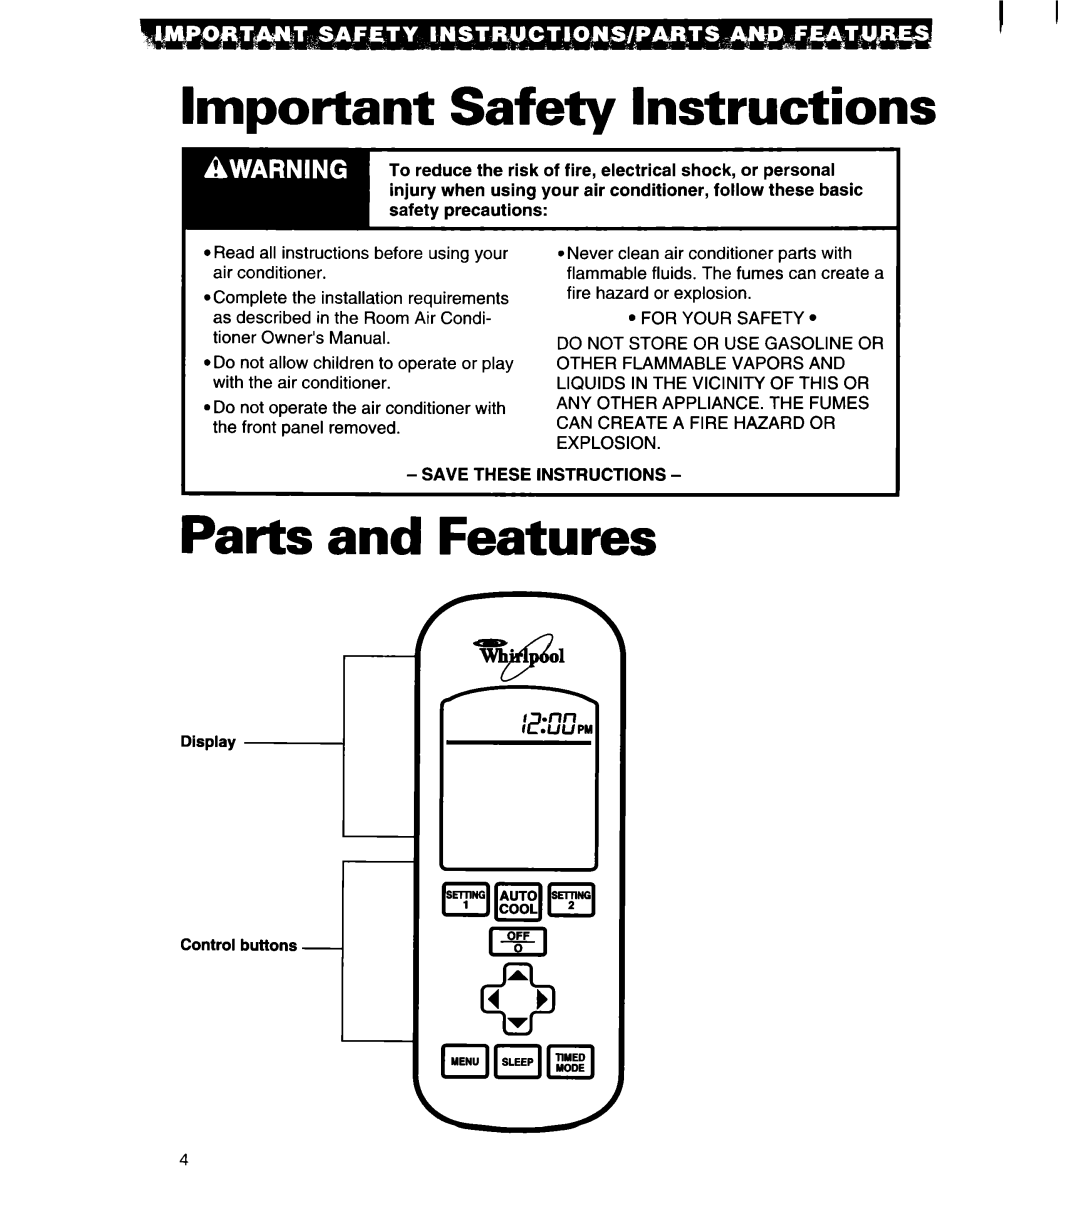 Whirlpool 1180435-A important safety instructions Important Safety Instructions, Parts and Features 